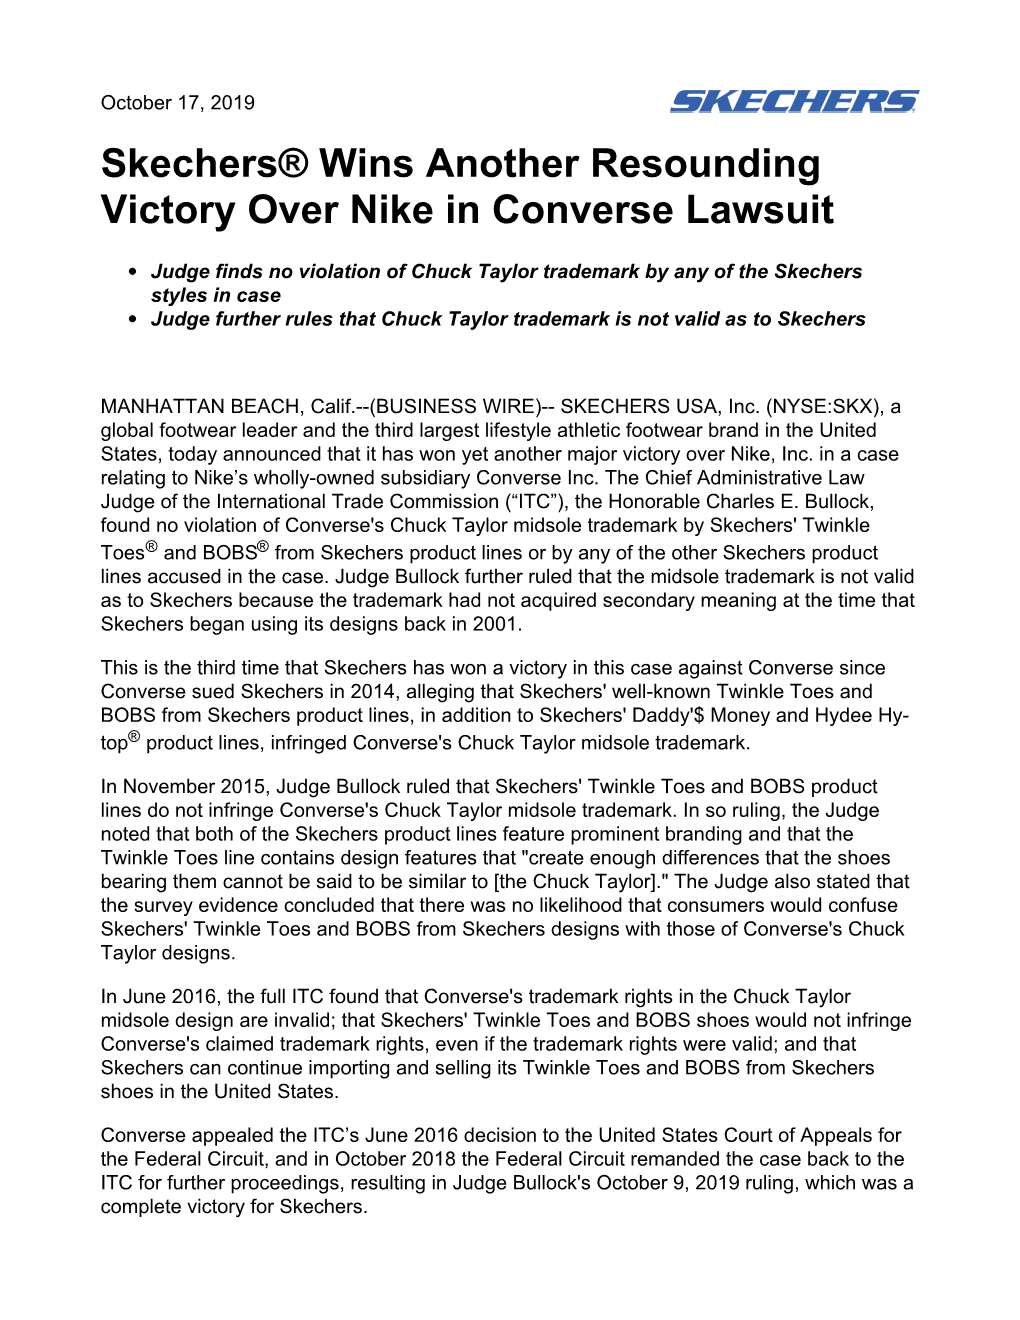 Skechers® Wins Another Resounding Victory Over Nike in Converse Lawsuit